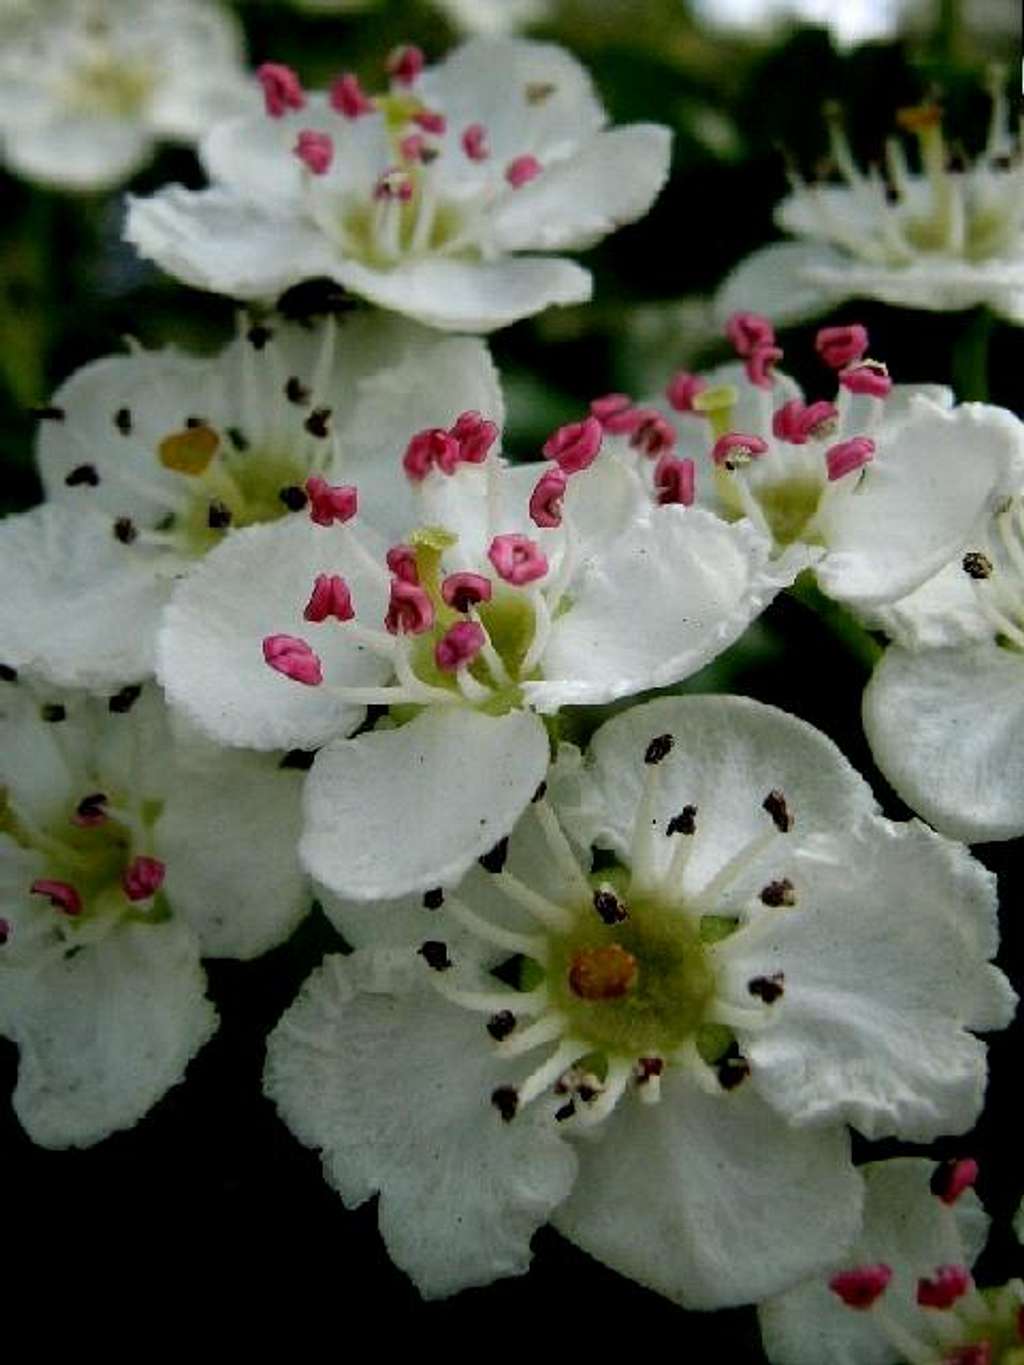 Blossoms of Common Hawthorn